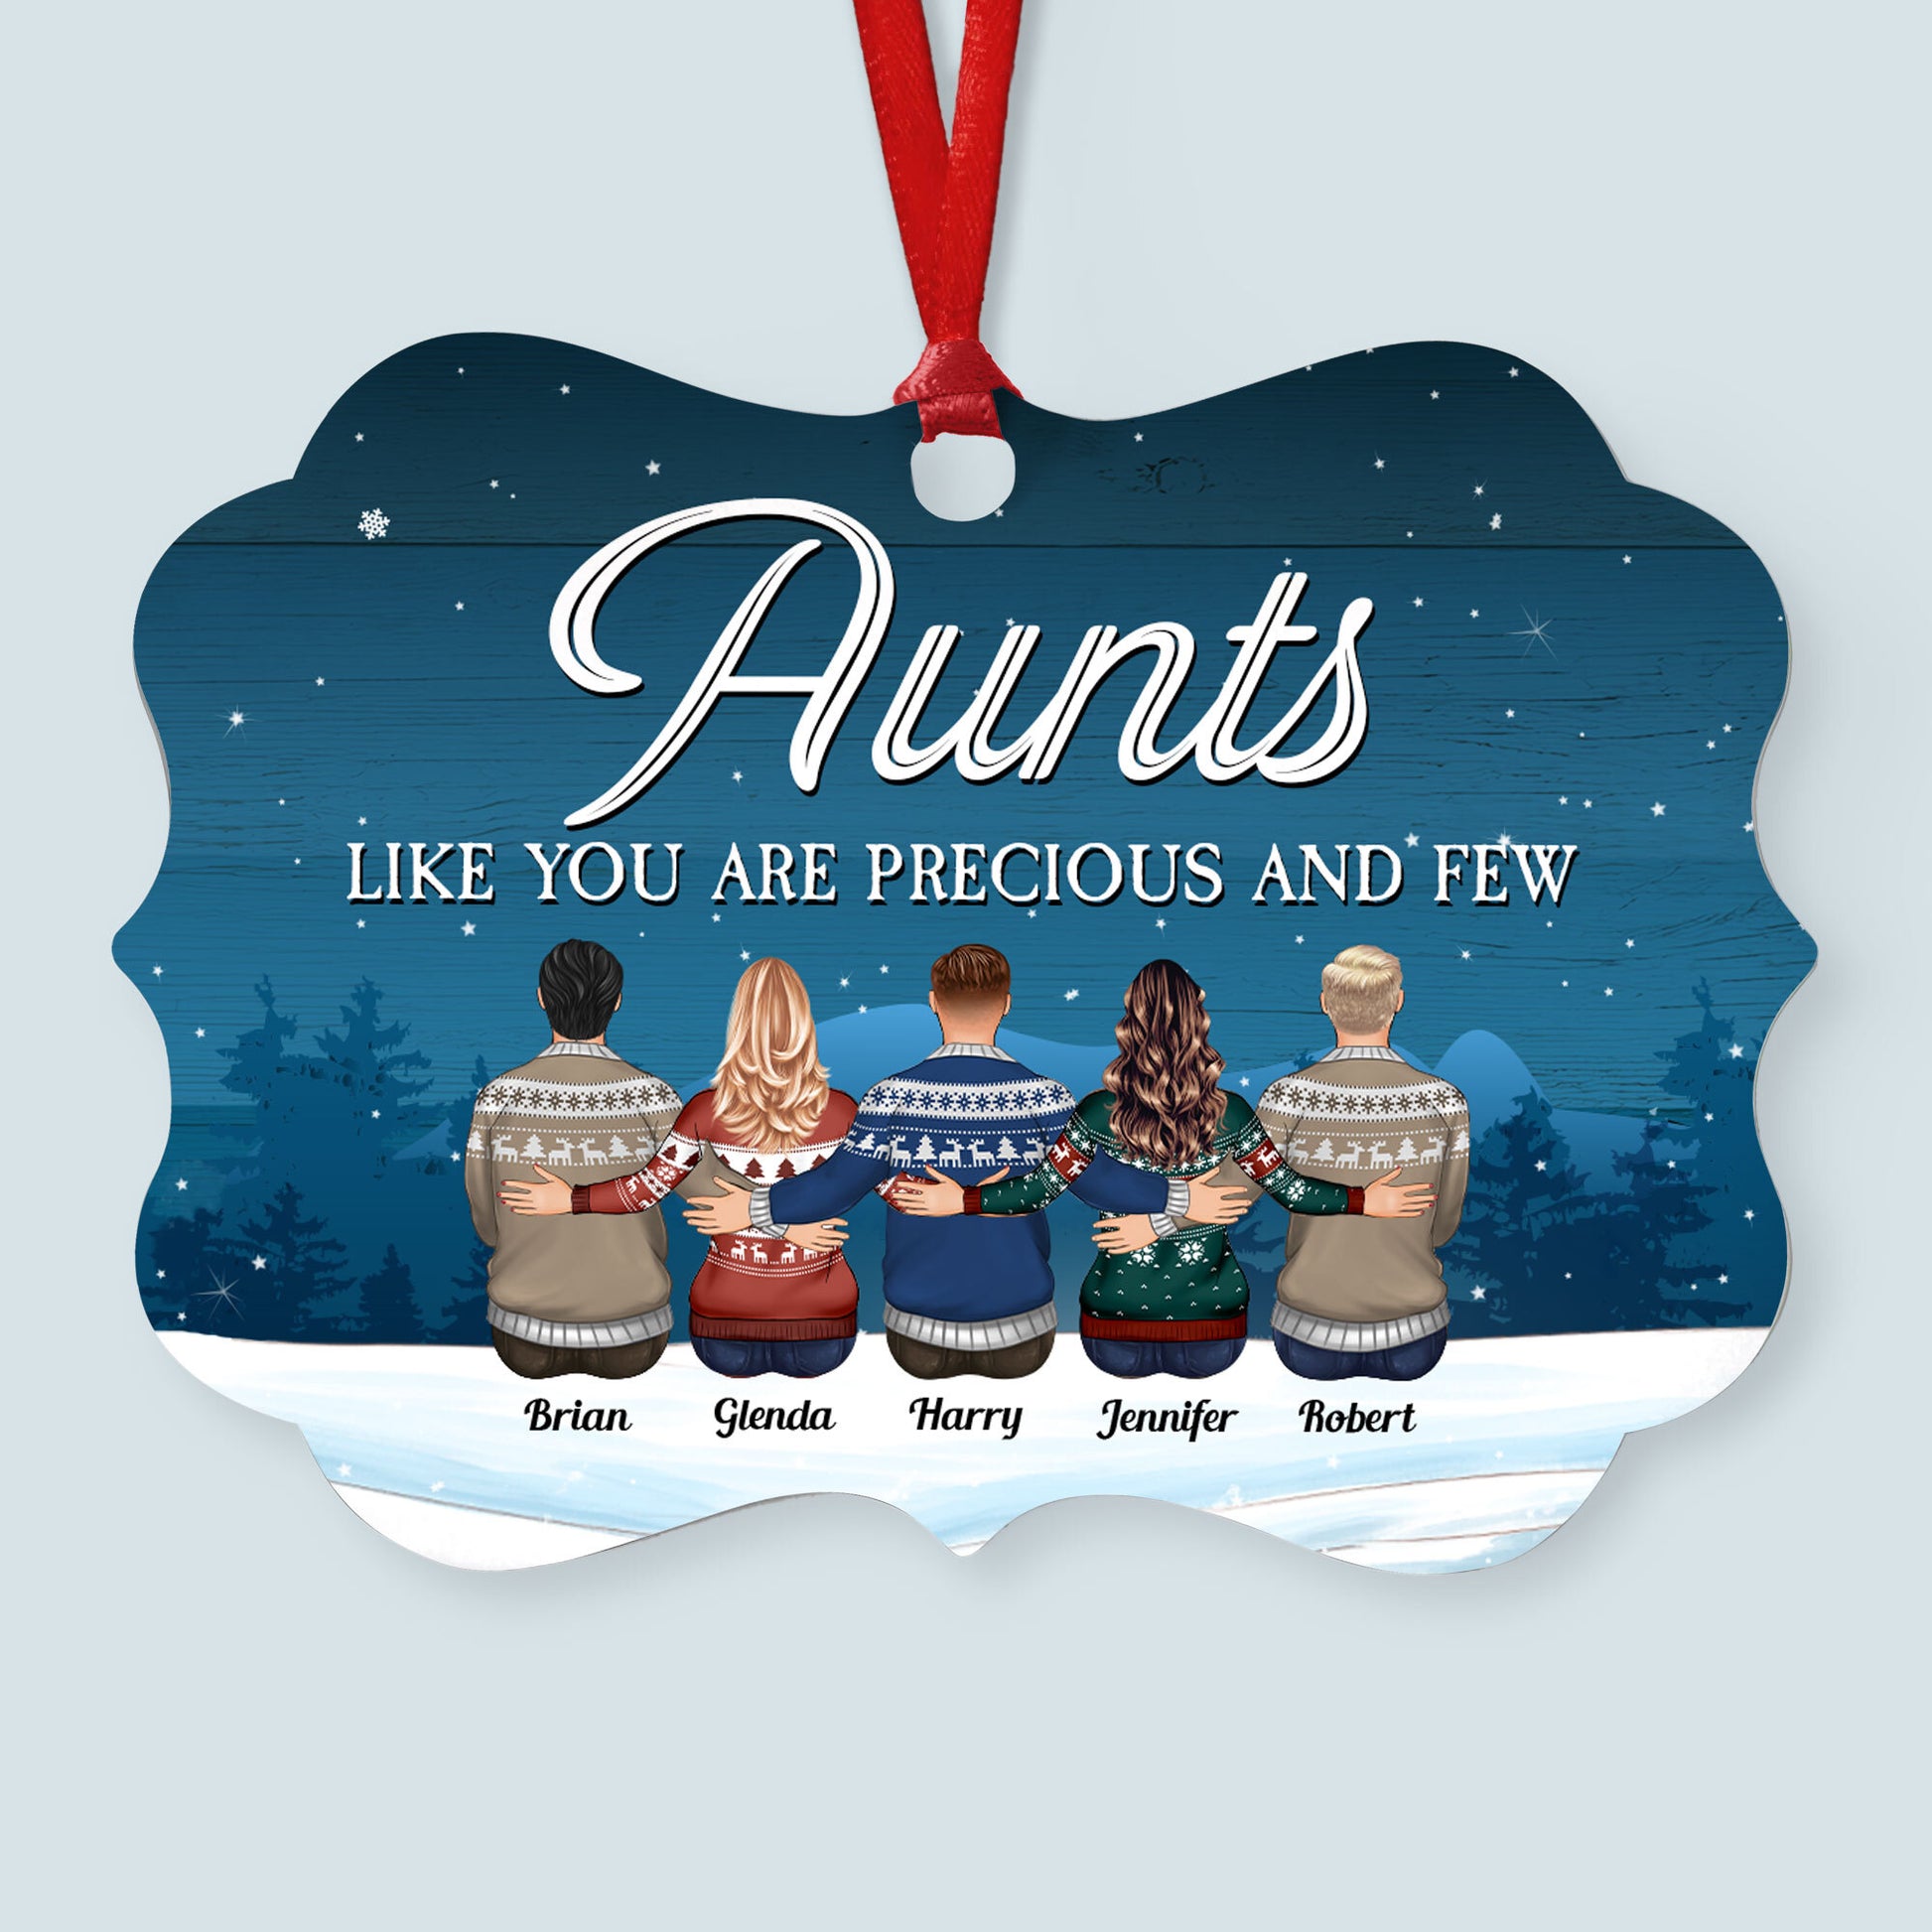 Aunts Like You Are Precious And Few - Personalized Aluminum Ornament - Christmas Gift For Aunts, Gift For Uncles, Gift For Cousins, Gift For Family - Family Hugging